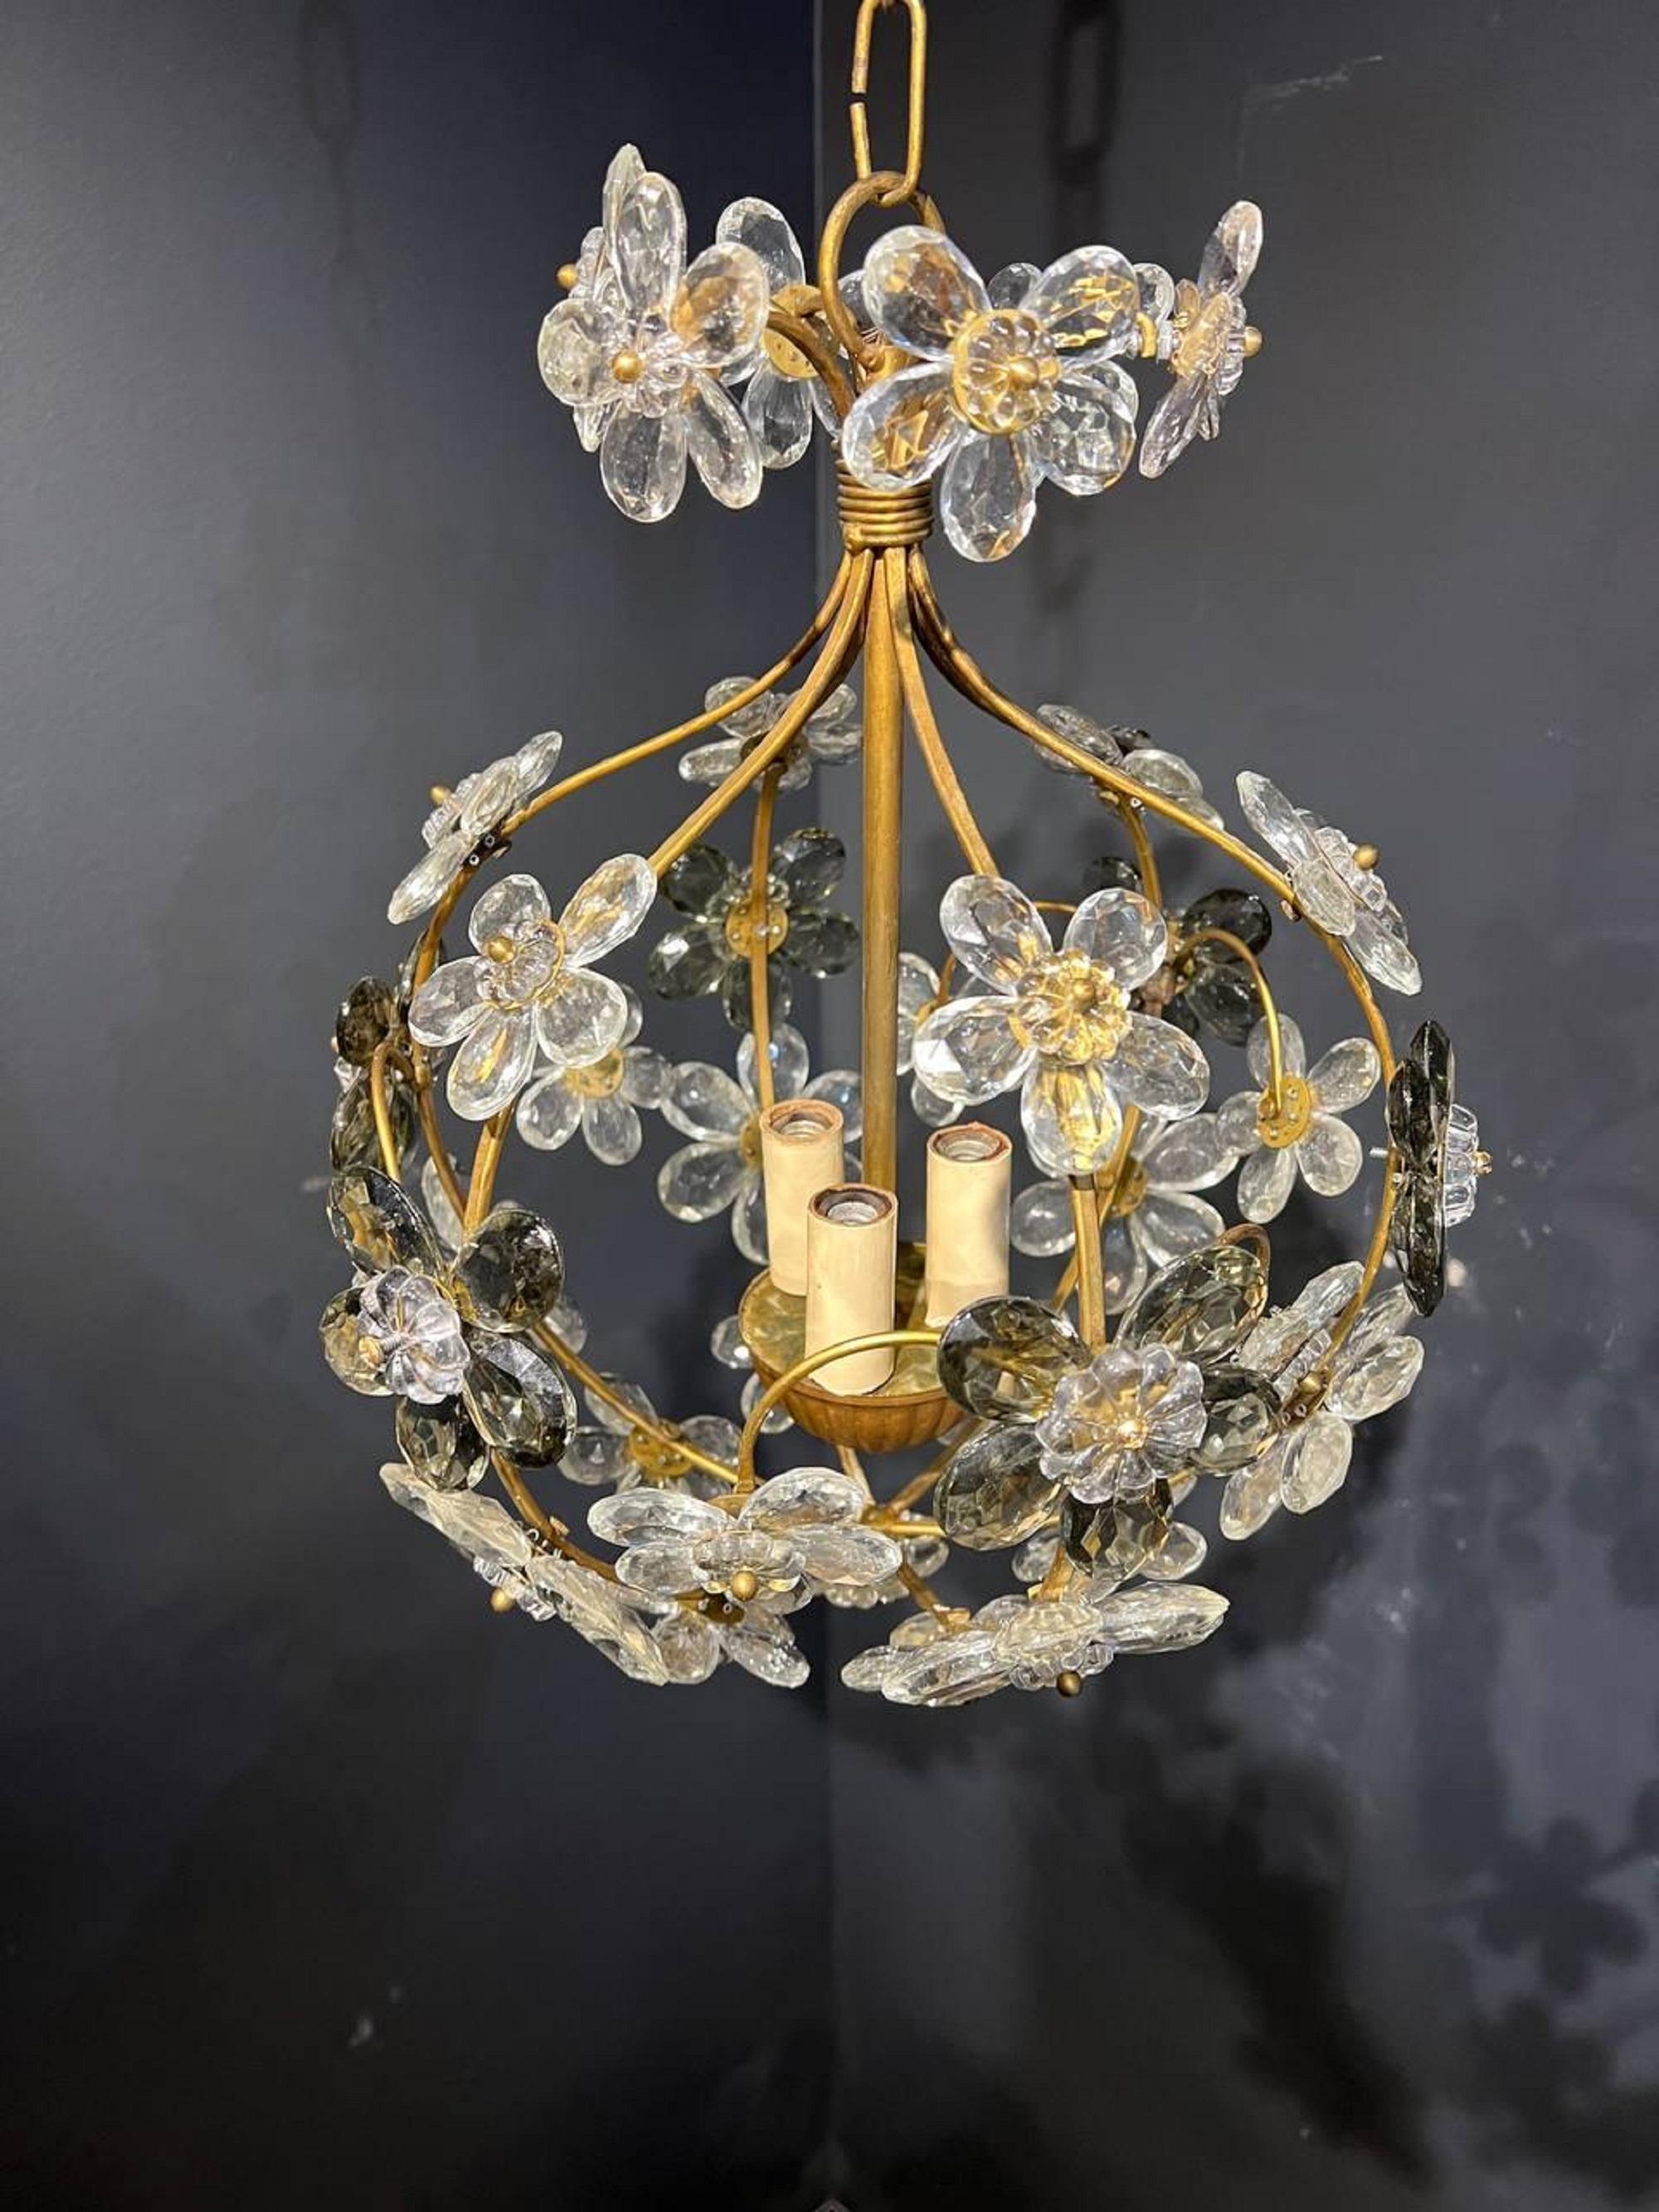 A circa 1930’s French style floral crystal chandelier with interior lights. Two colors of crystals white and black. Up to 120V (US Standard): Hardwired. In very good vintage condition. 

Dealer: G302YP.

